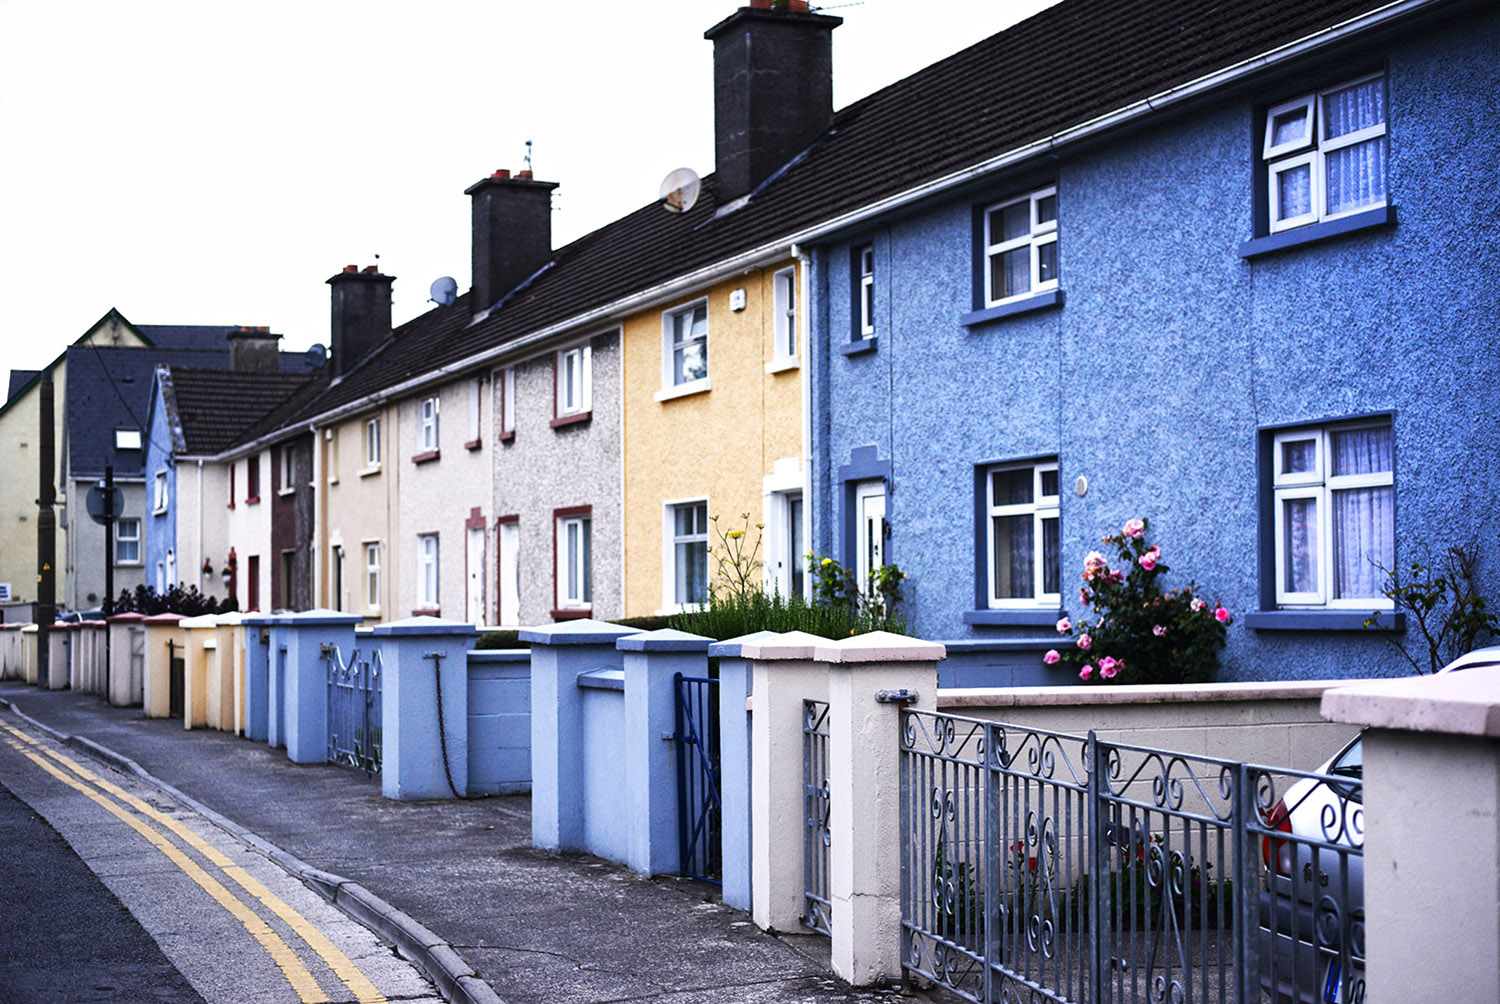 Architecture_Homes_Tourism_Ennis_County_Clare_Ireland.jpg